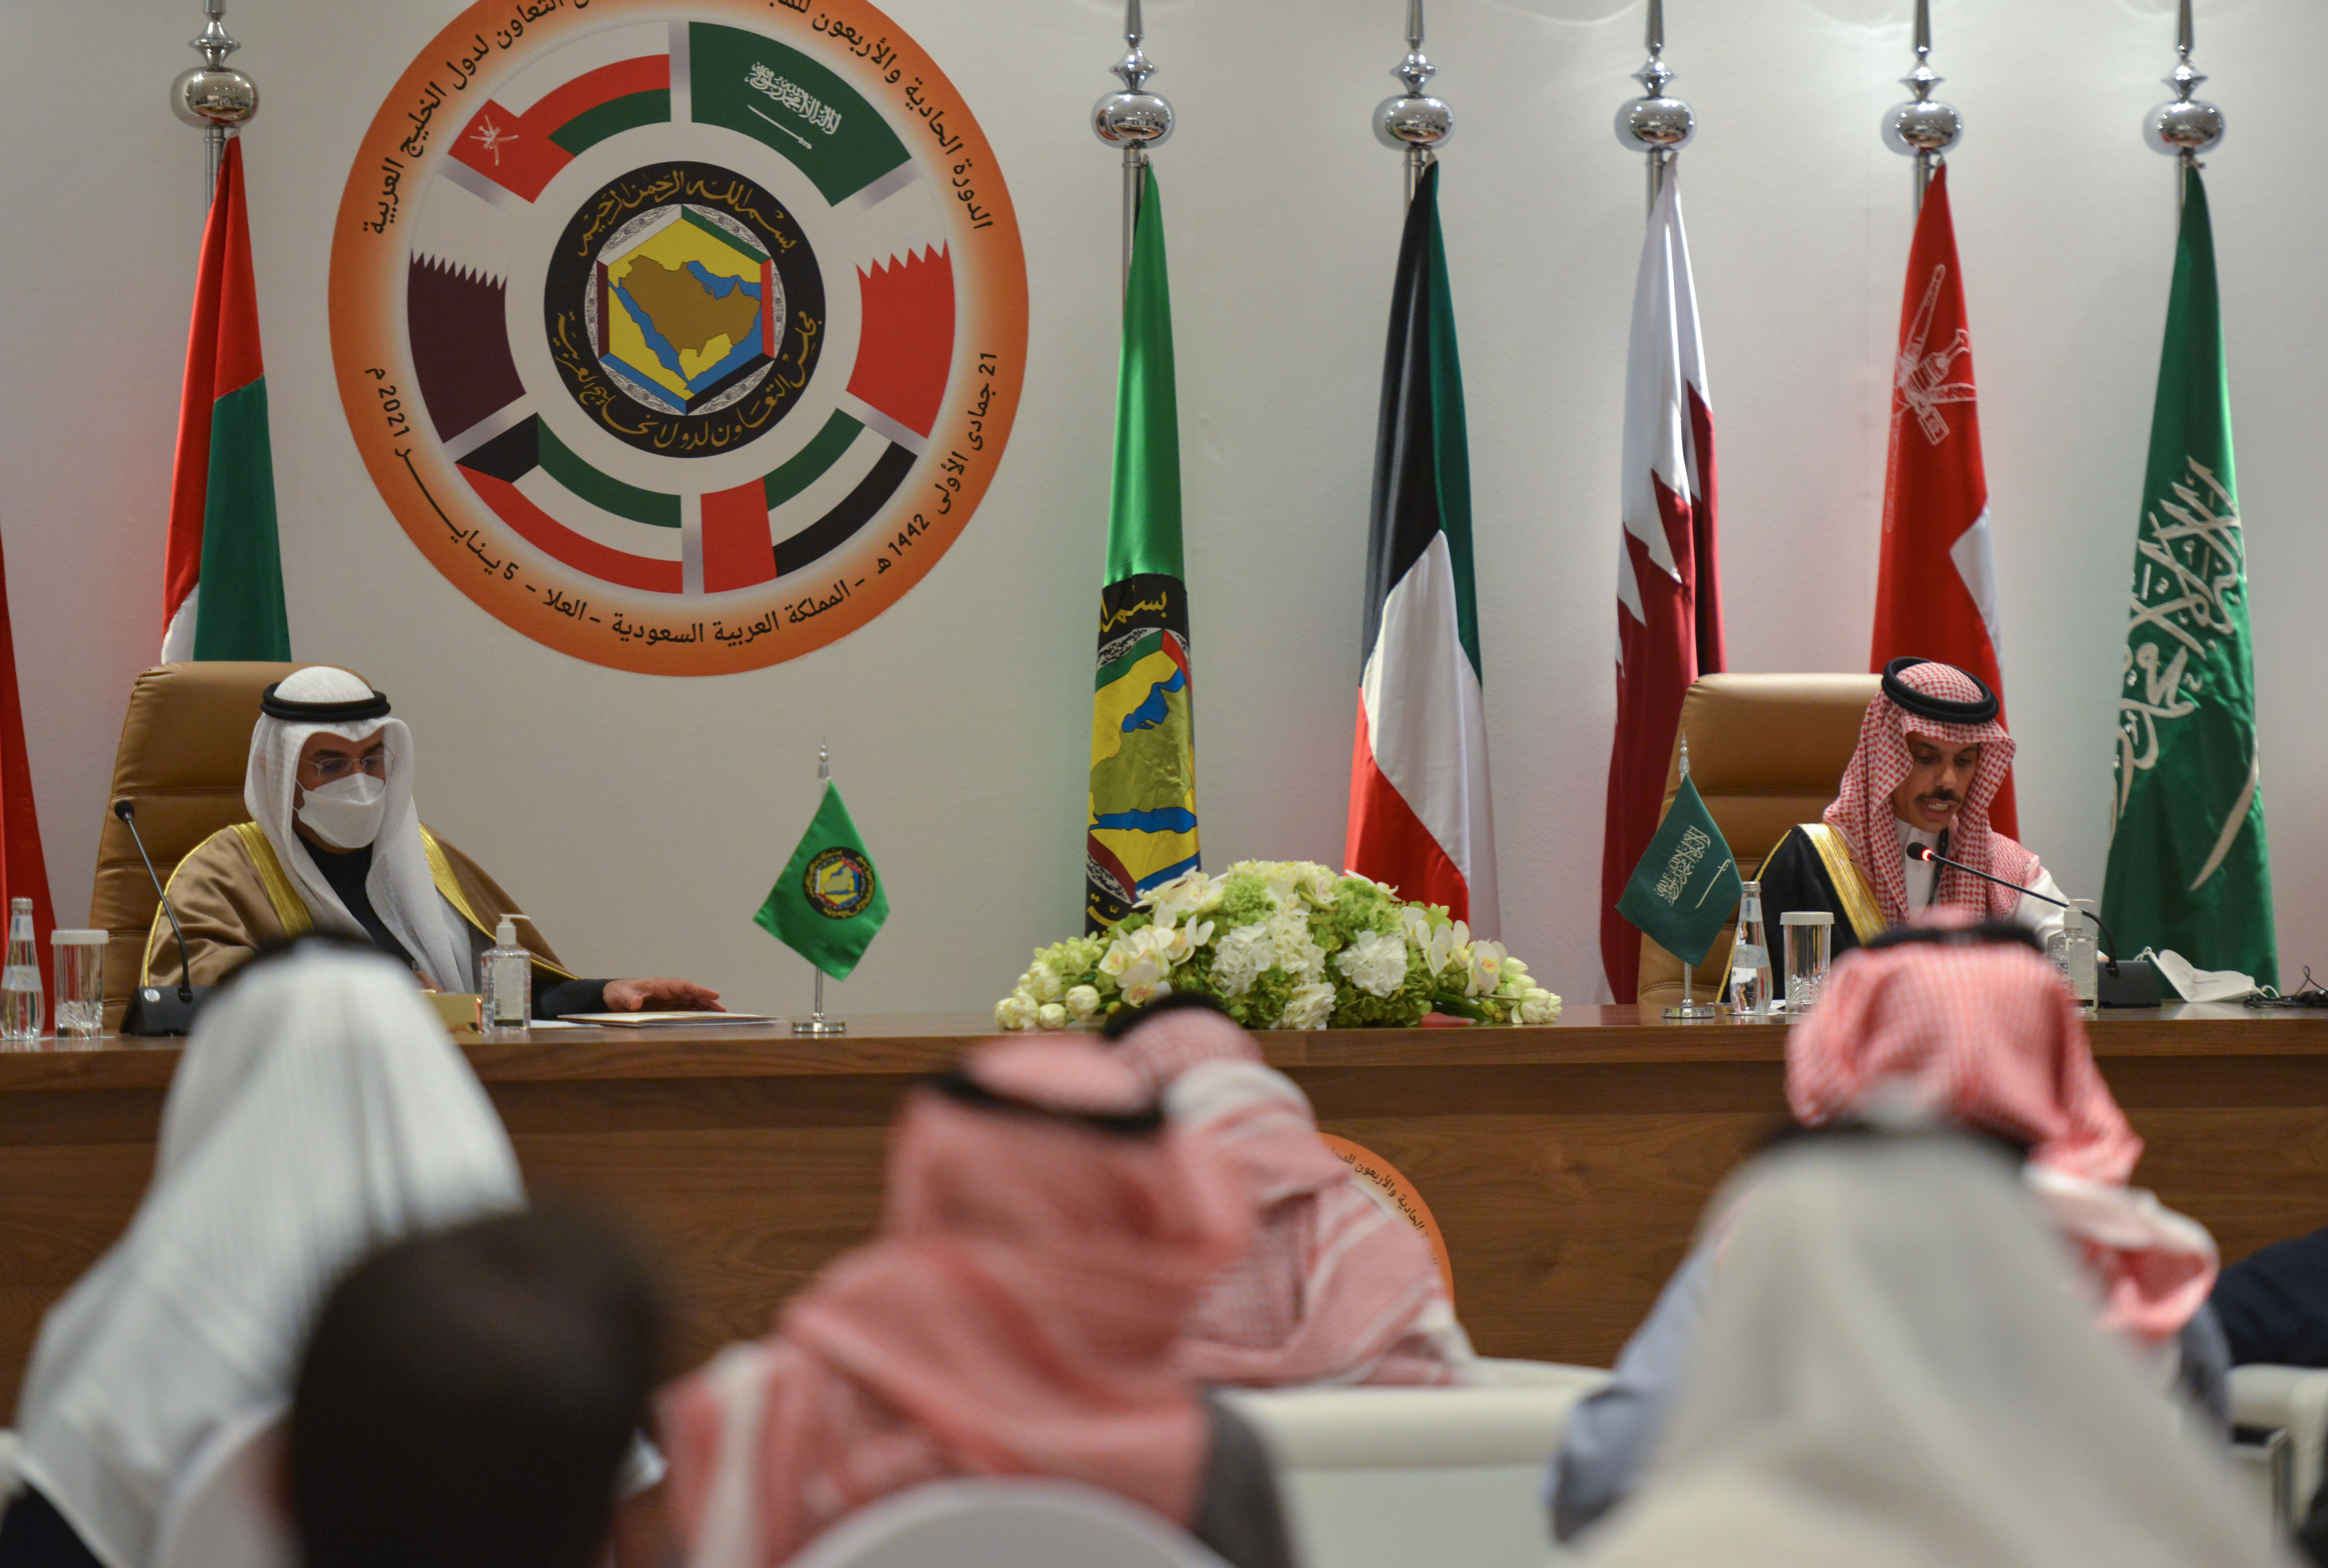 Saudi Foreign Minister Faisal bin Farhan al-Saud (R) and Secretary-General of the GCC Nayef bin Falah Al-Hajraf, hold a press conference at the end of the GCC’s 41st summit, in the city of al-Ula in northwestern Saudi Arabia on January 5, 2021. Photo by FAYEZ NURELDINE/AFP via Getty Images.